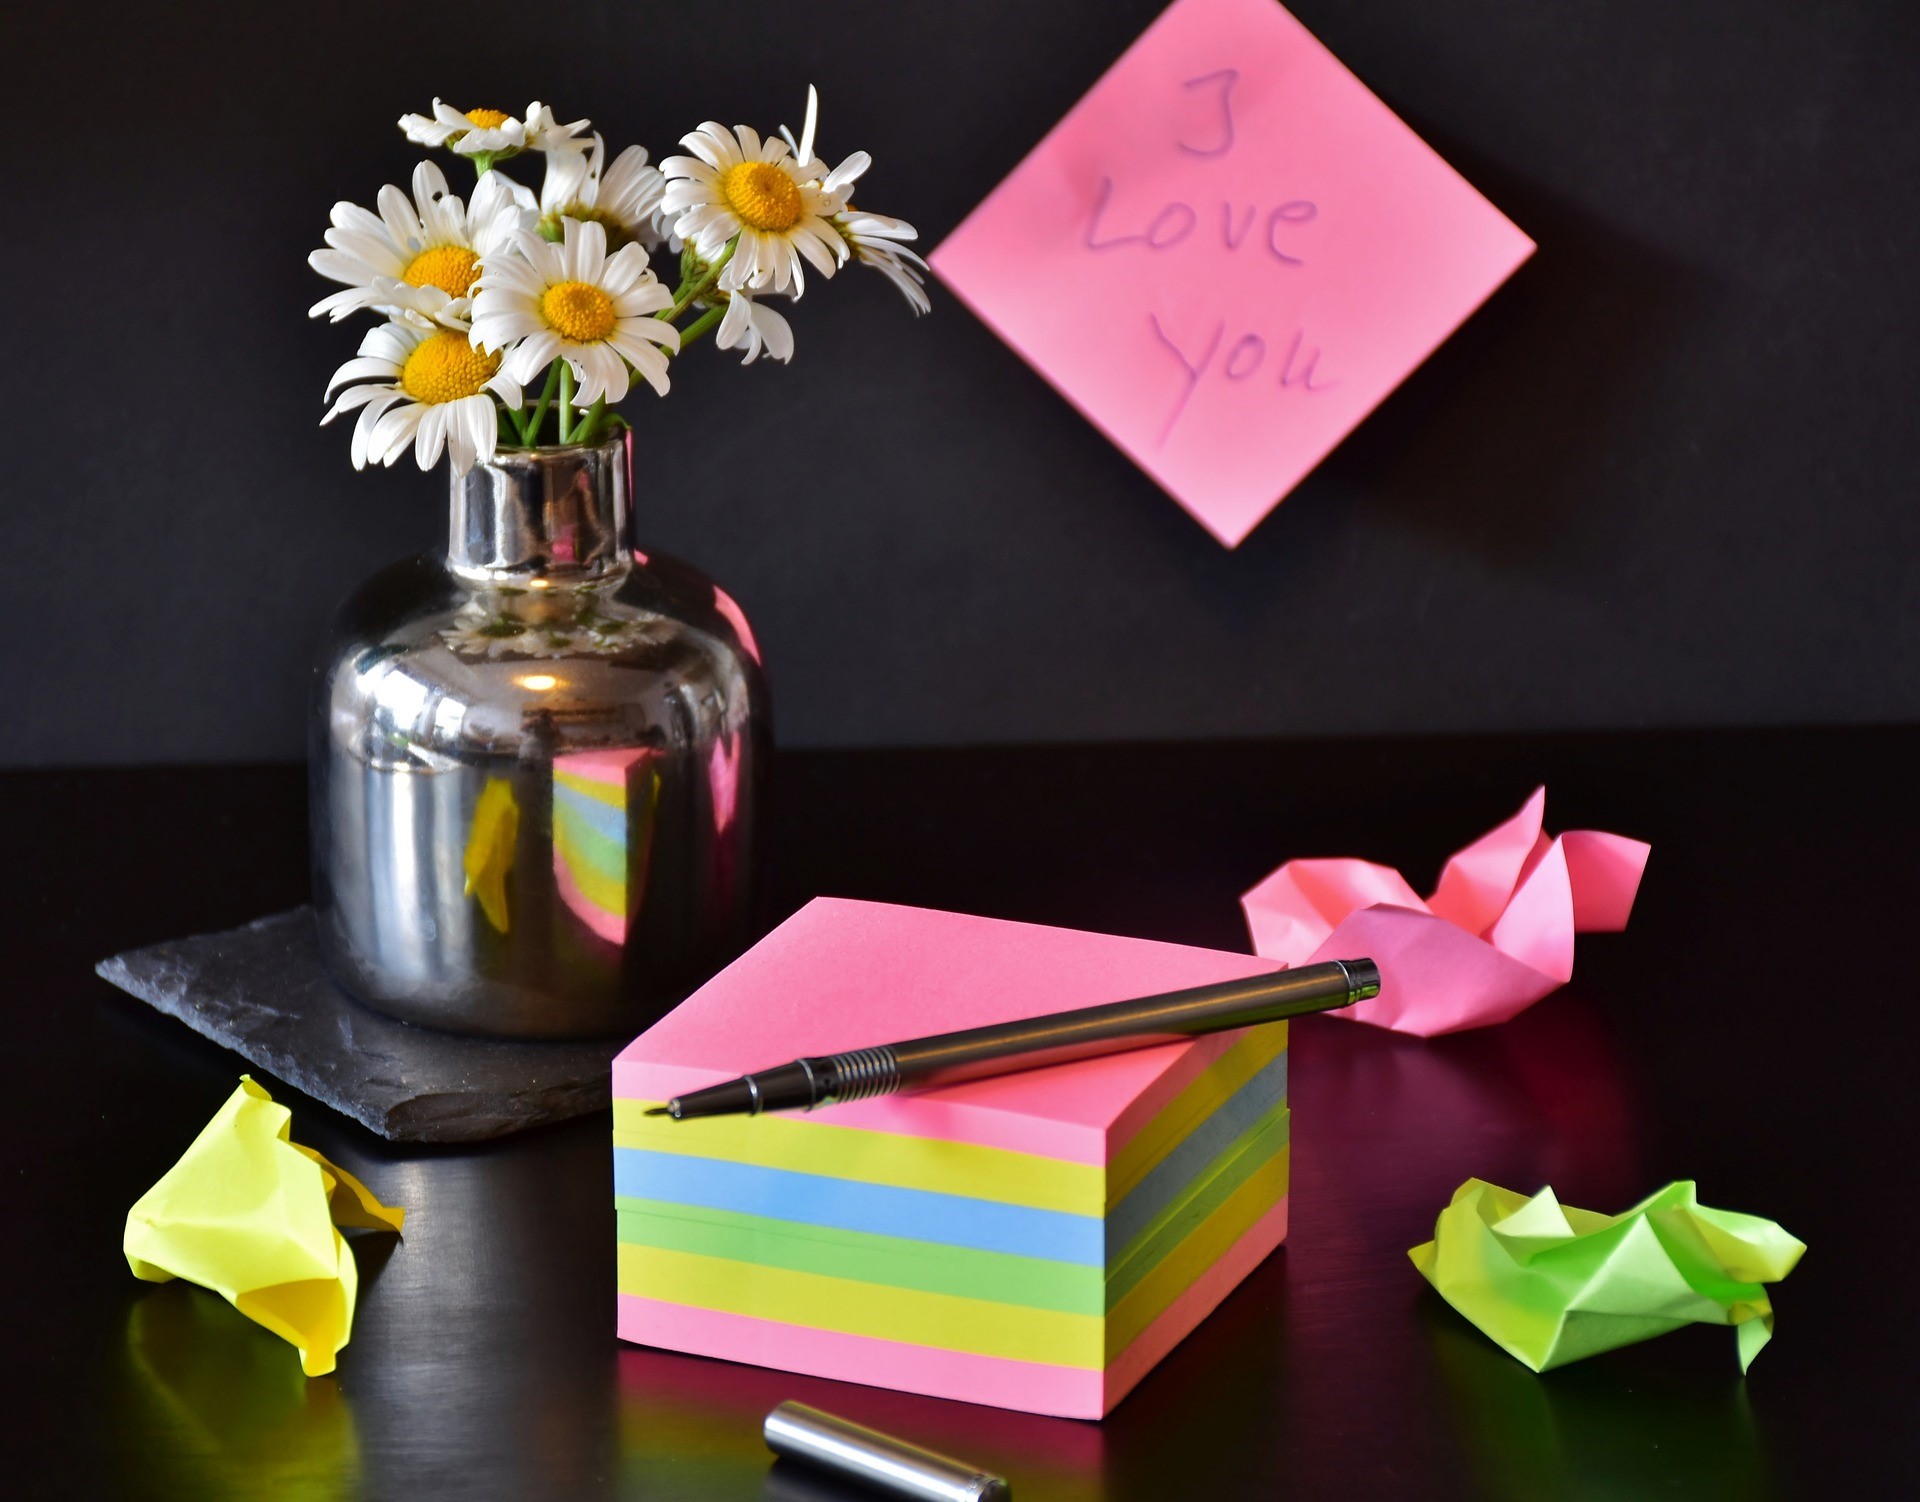 notes-post it-flower-love